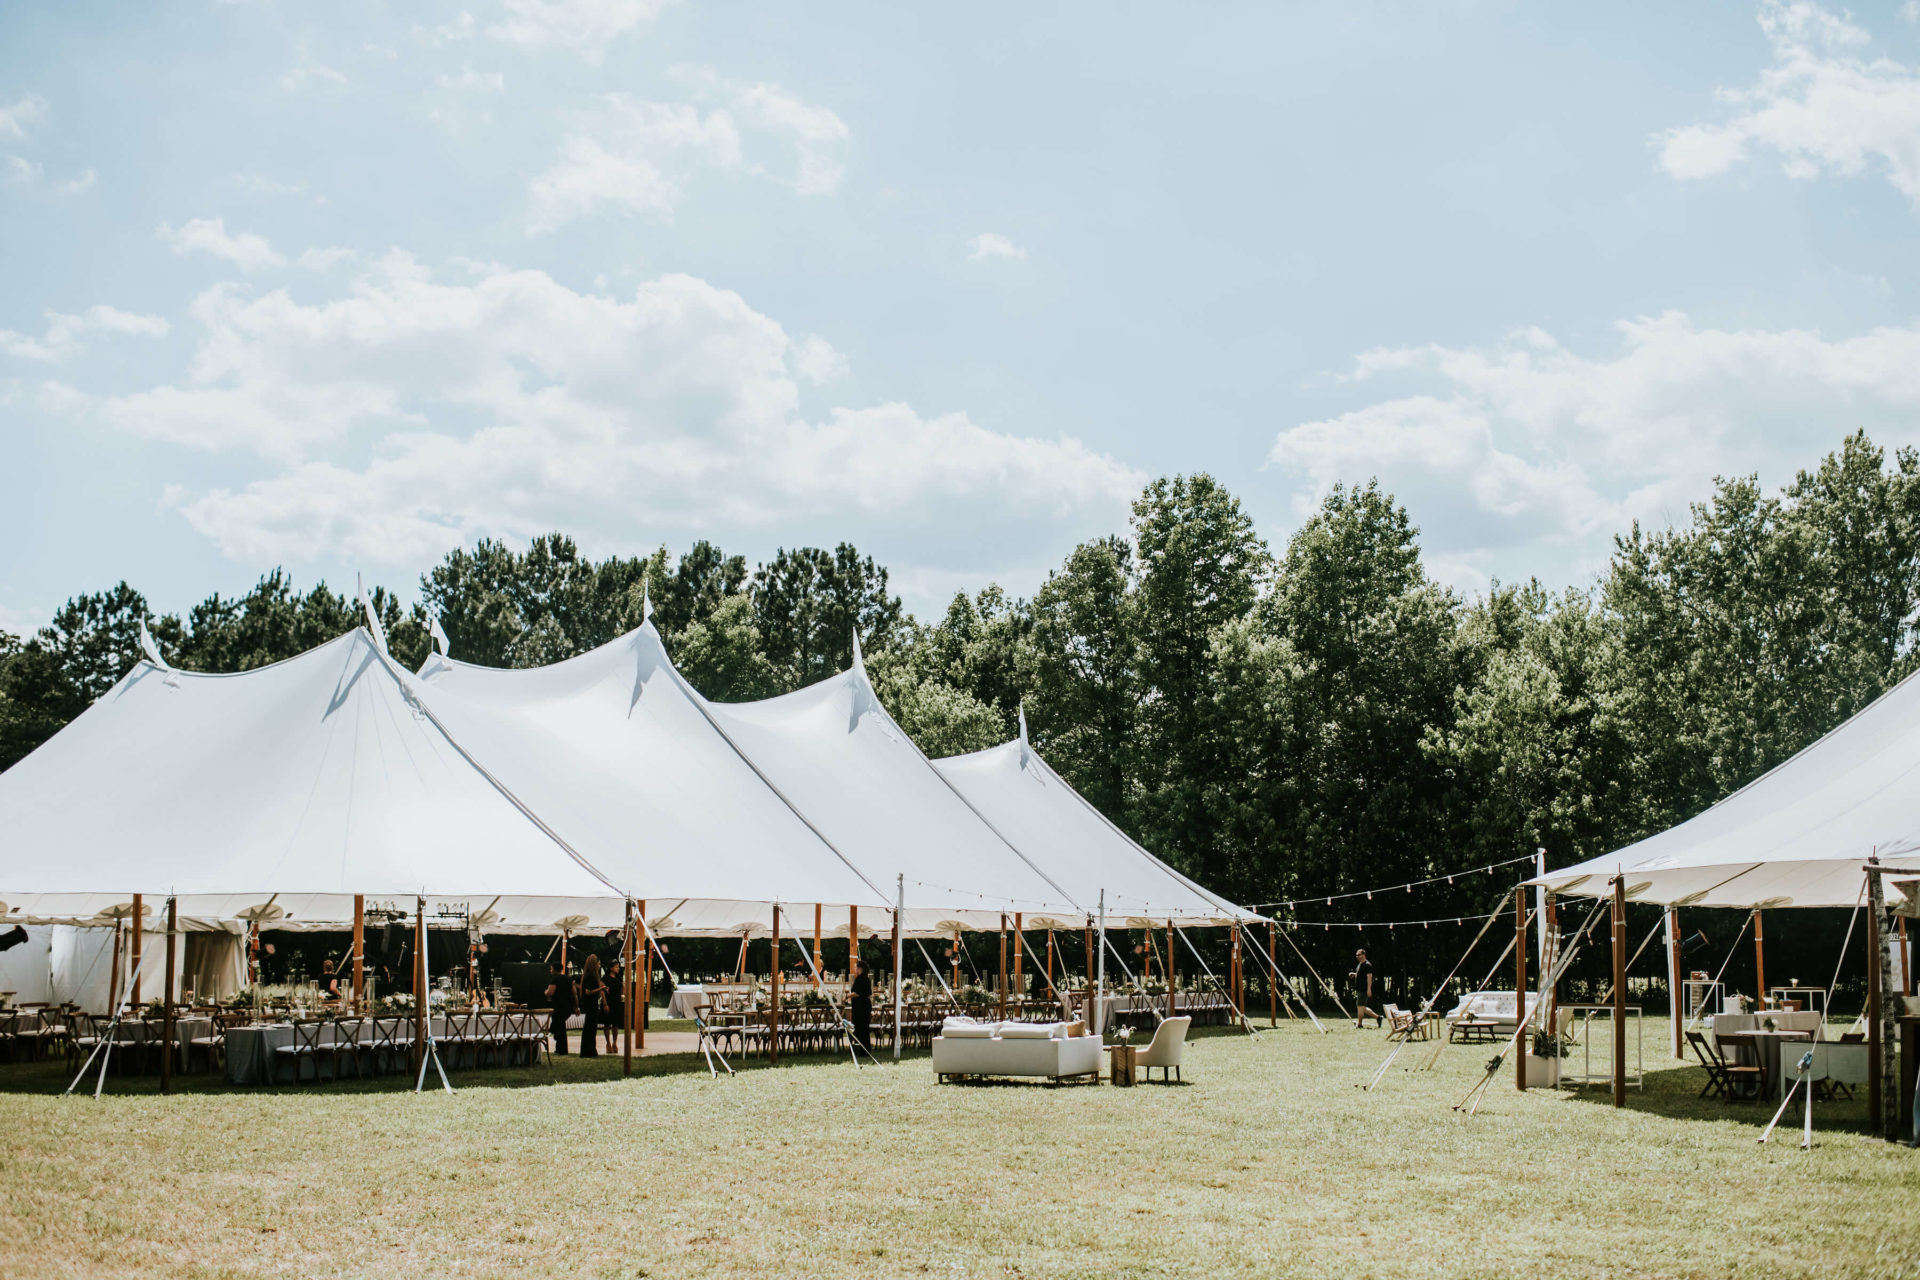 multiple white sail cloth tents in the grass